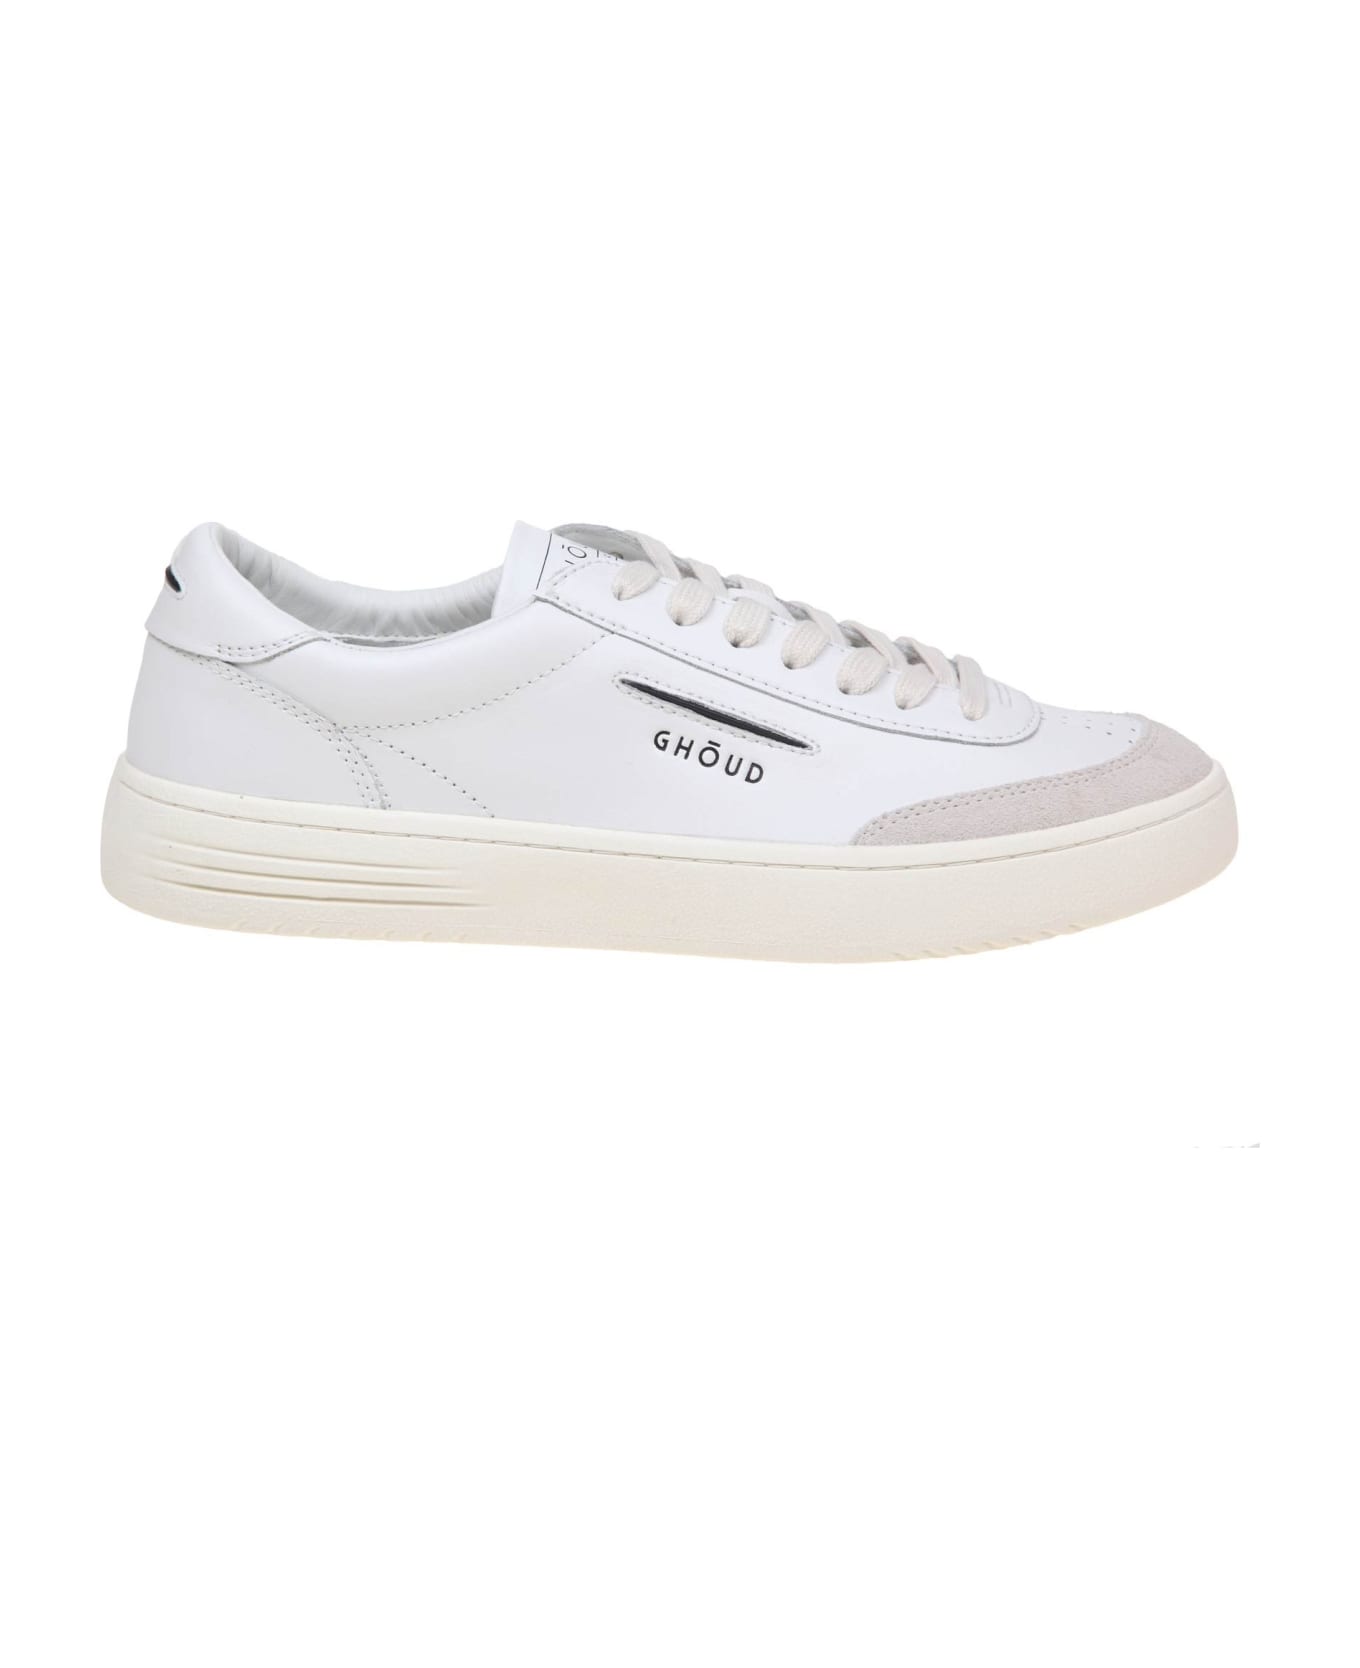 GHOUD Lido Low Sneakers In White Leather And Suede - LEAT/SUEDE WHITE